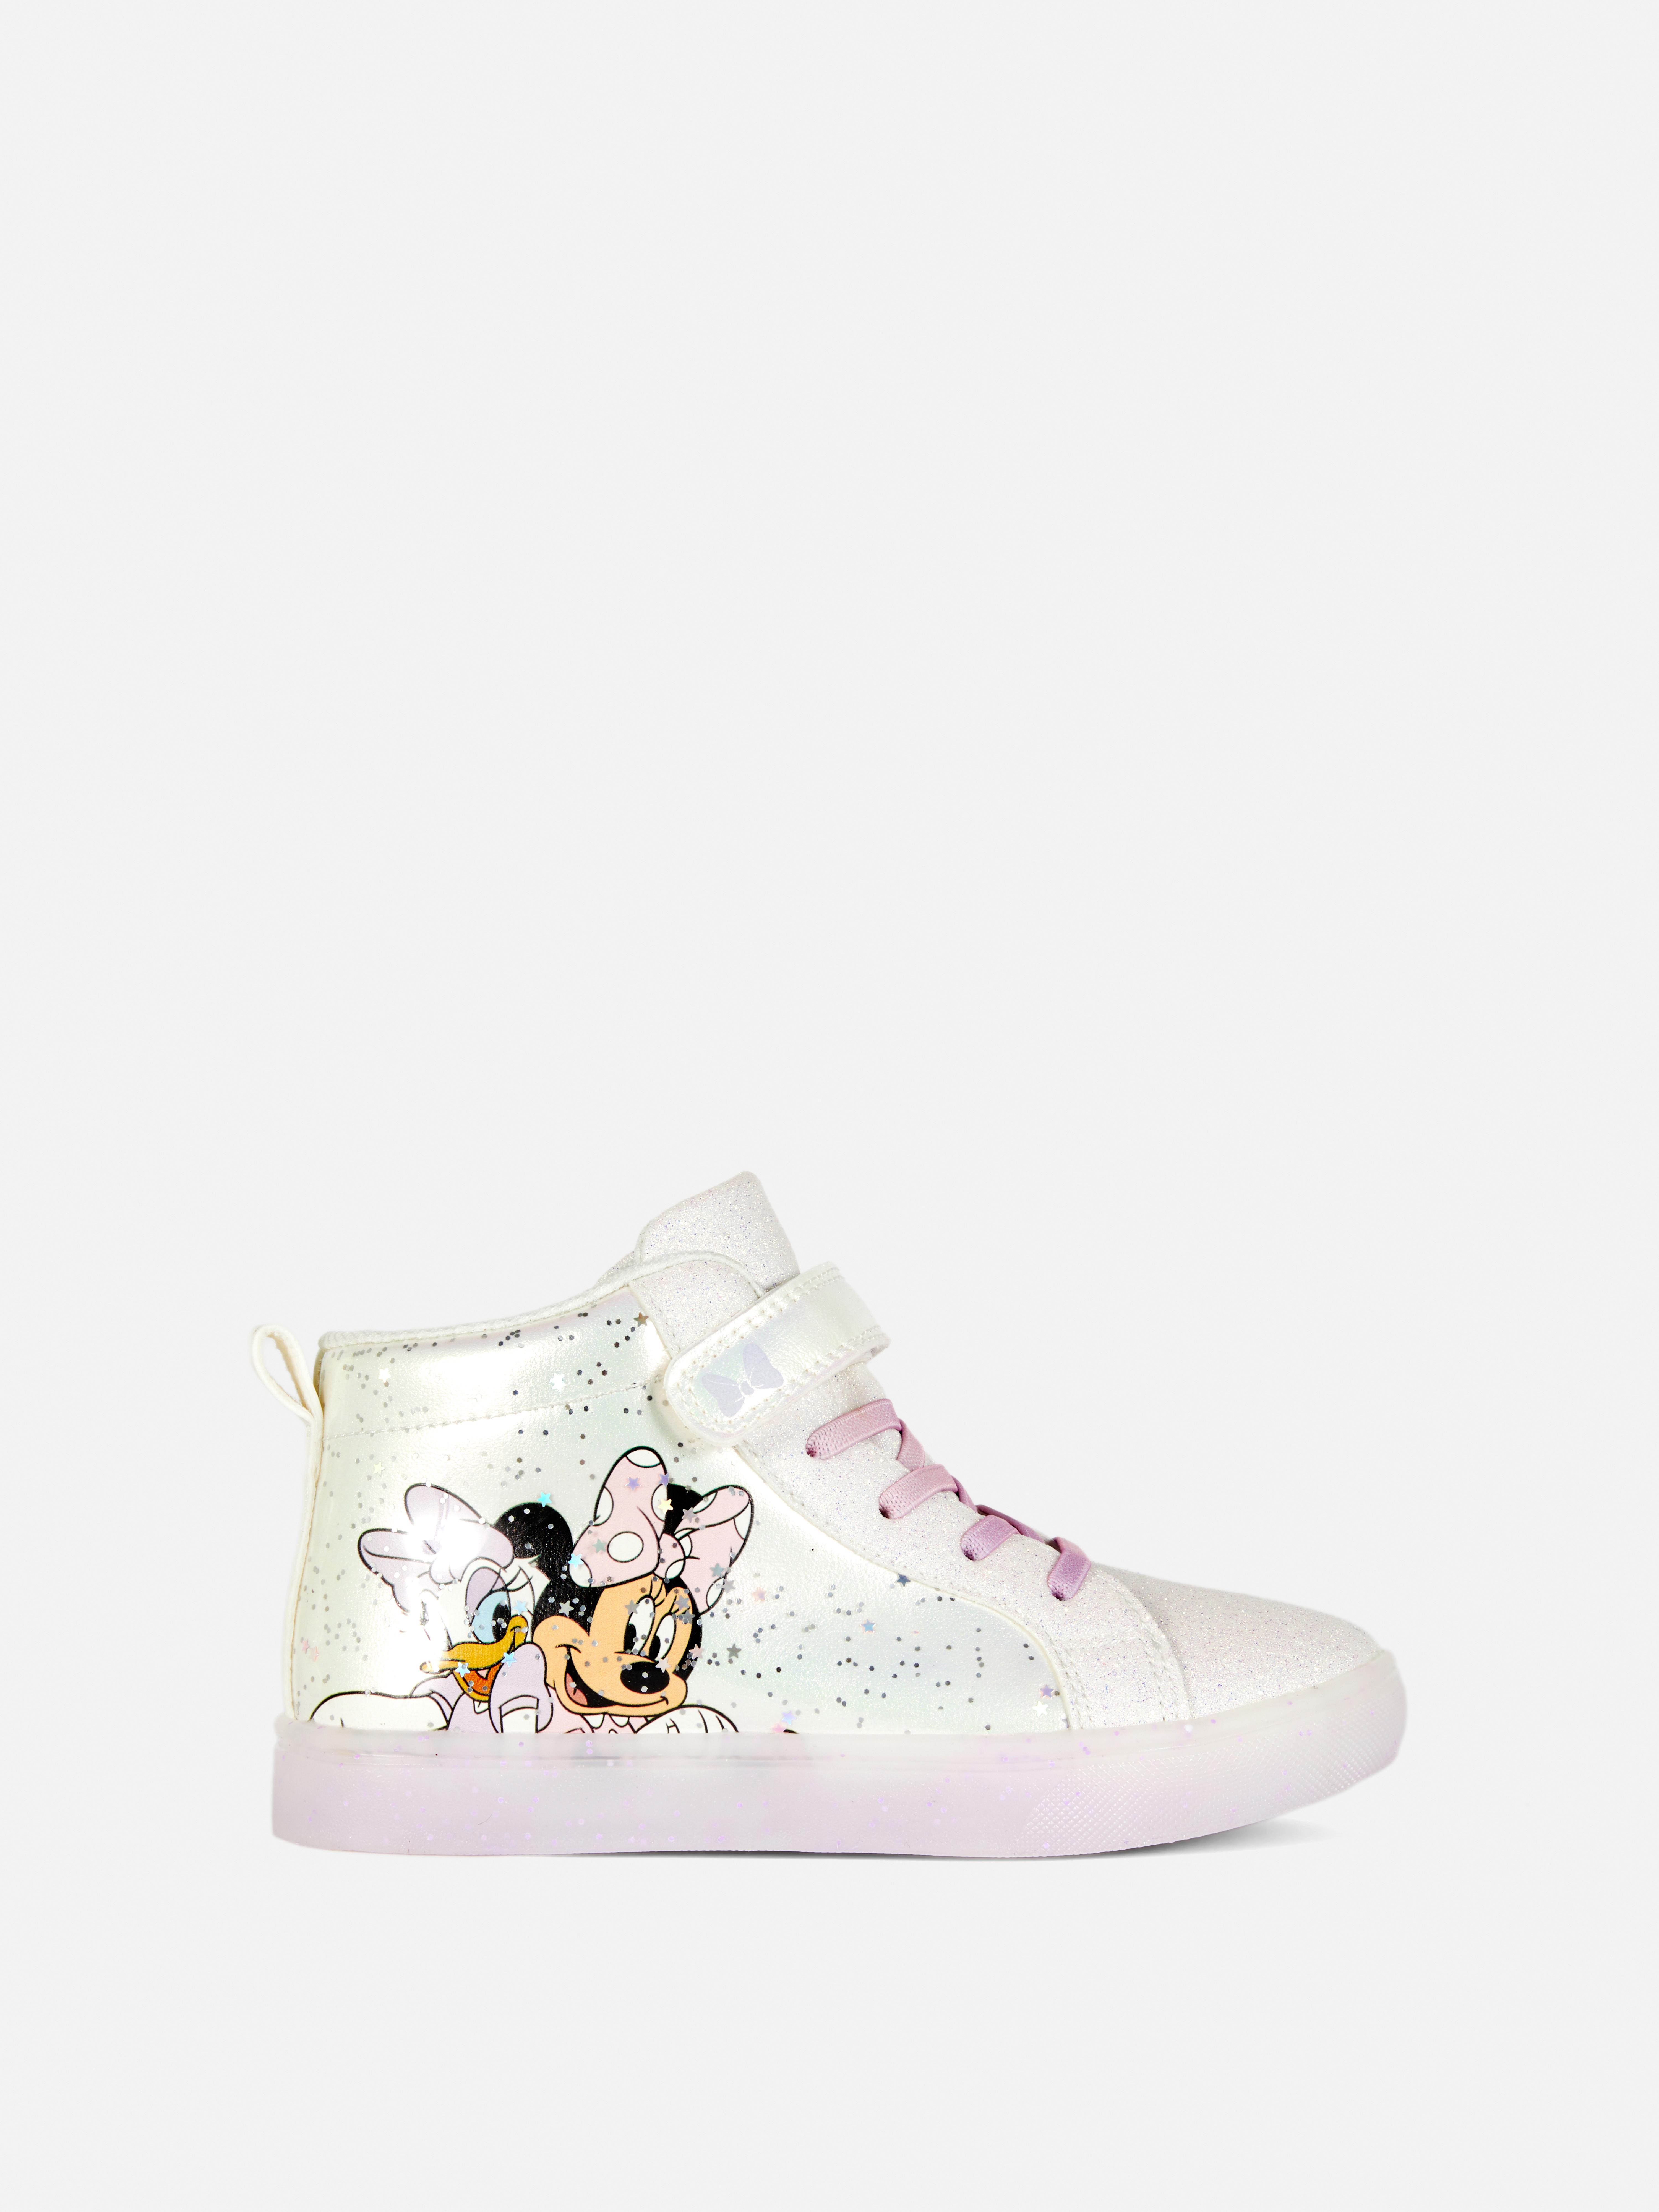 Disney’s Minnie Mouse and Daisy Duck Light Up Sneakers